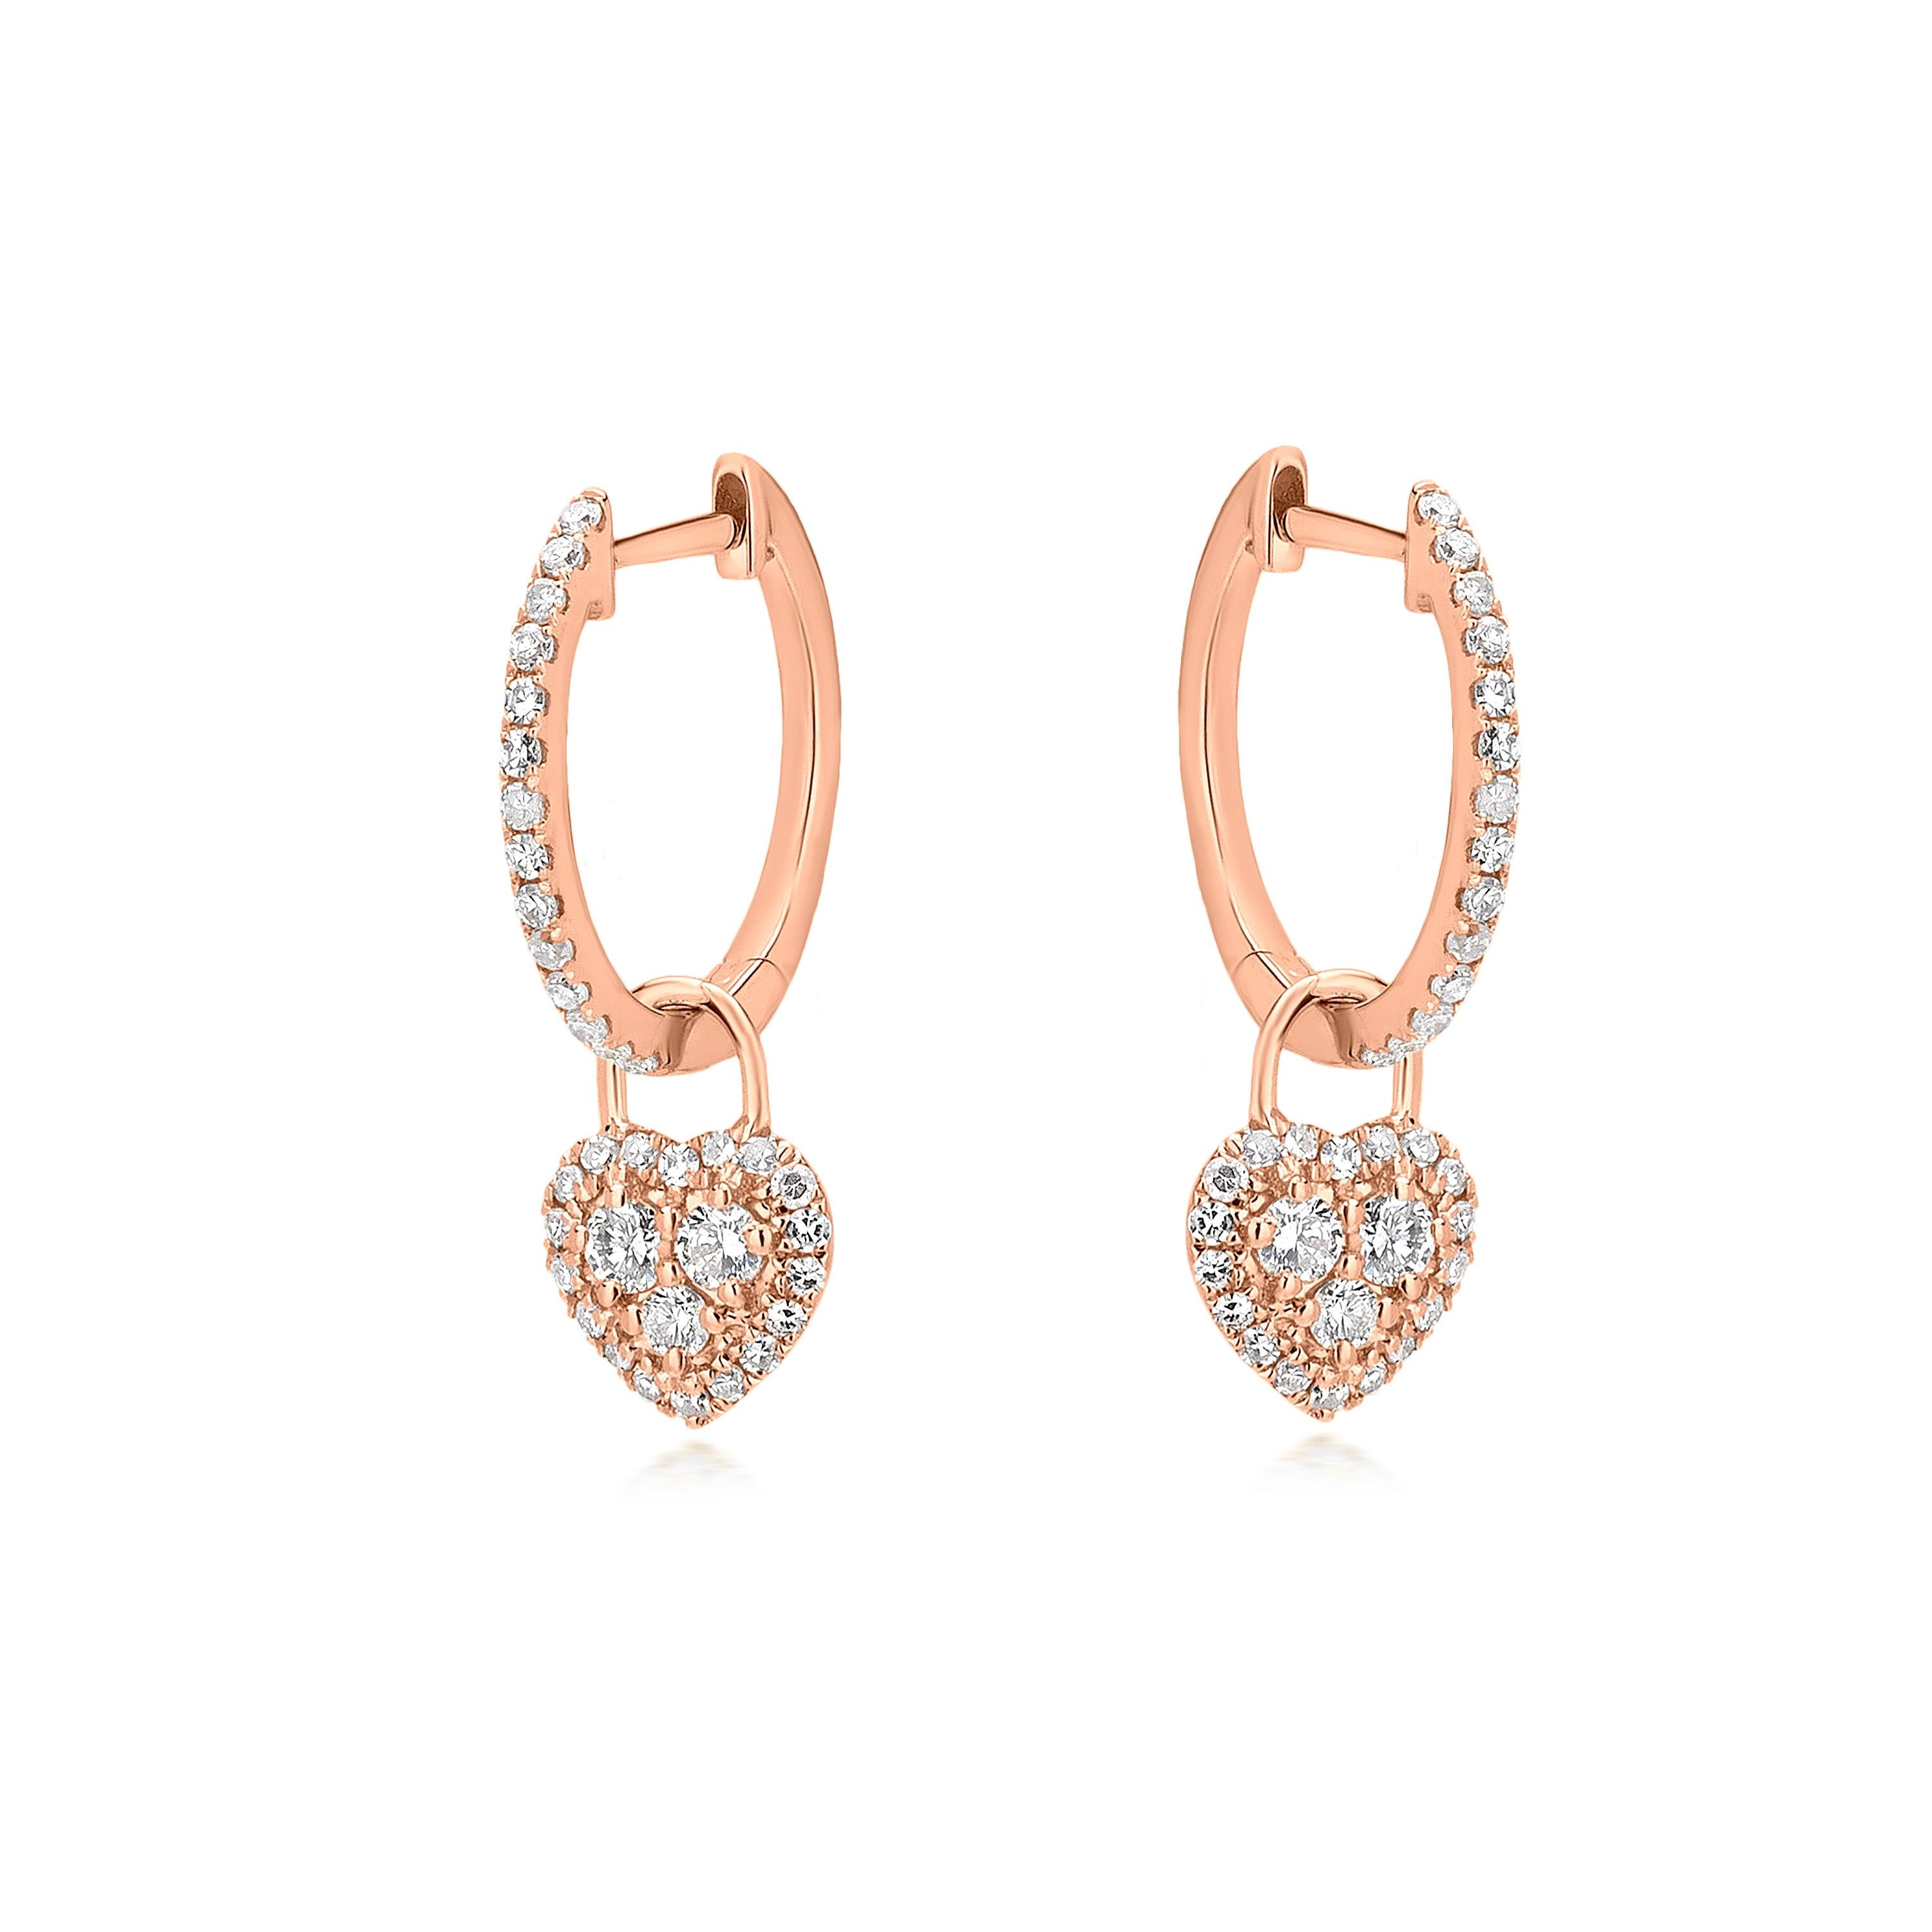 These Luxle heart hoop drop earrings, fashioned of 18k rose gold and sparkling diamonds, will make a lovely statement. A piece with diamond settings is the center of the heart motif. These lobe-hugging earrings have a sweet heart drop that sways